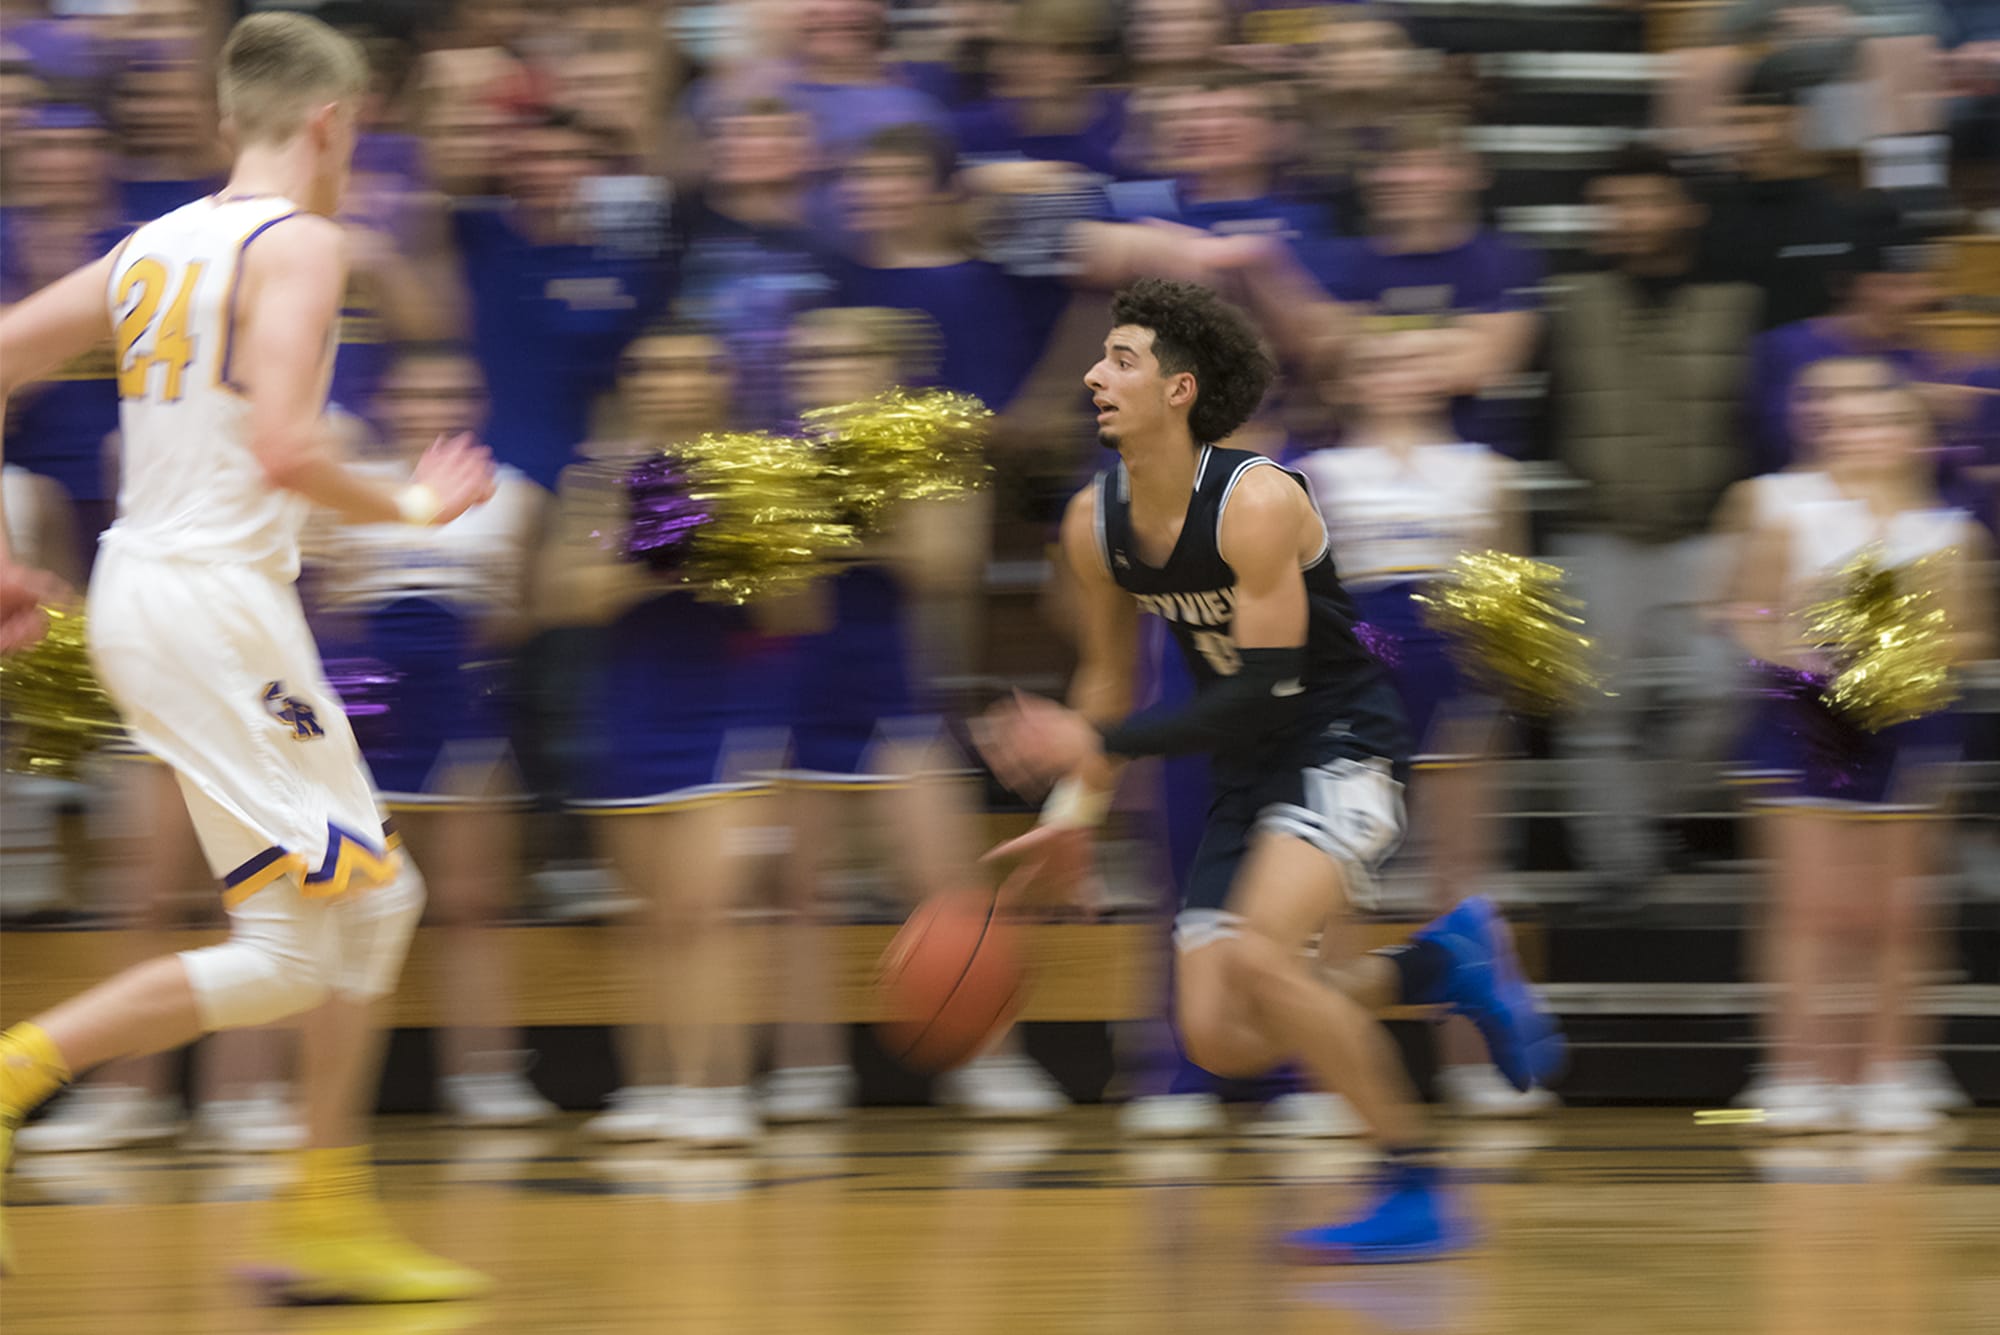 Skyview's Alex Schumacher takes the ball up the court against Columbia River during a match at Columbia River High School on Friday night, Dec. 14, 2018.